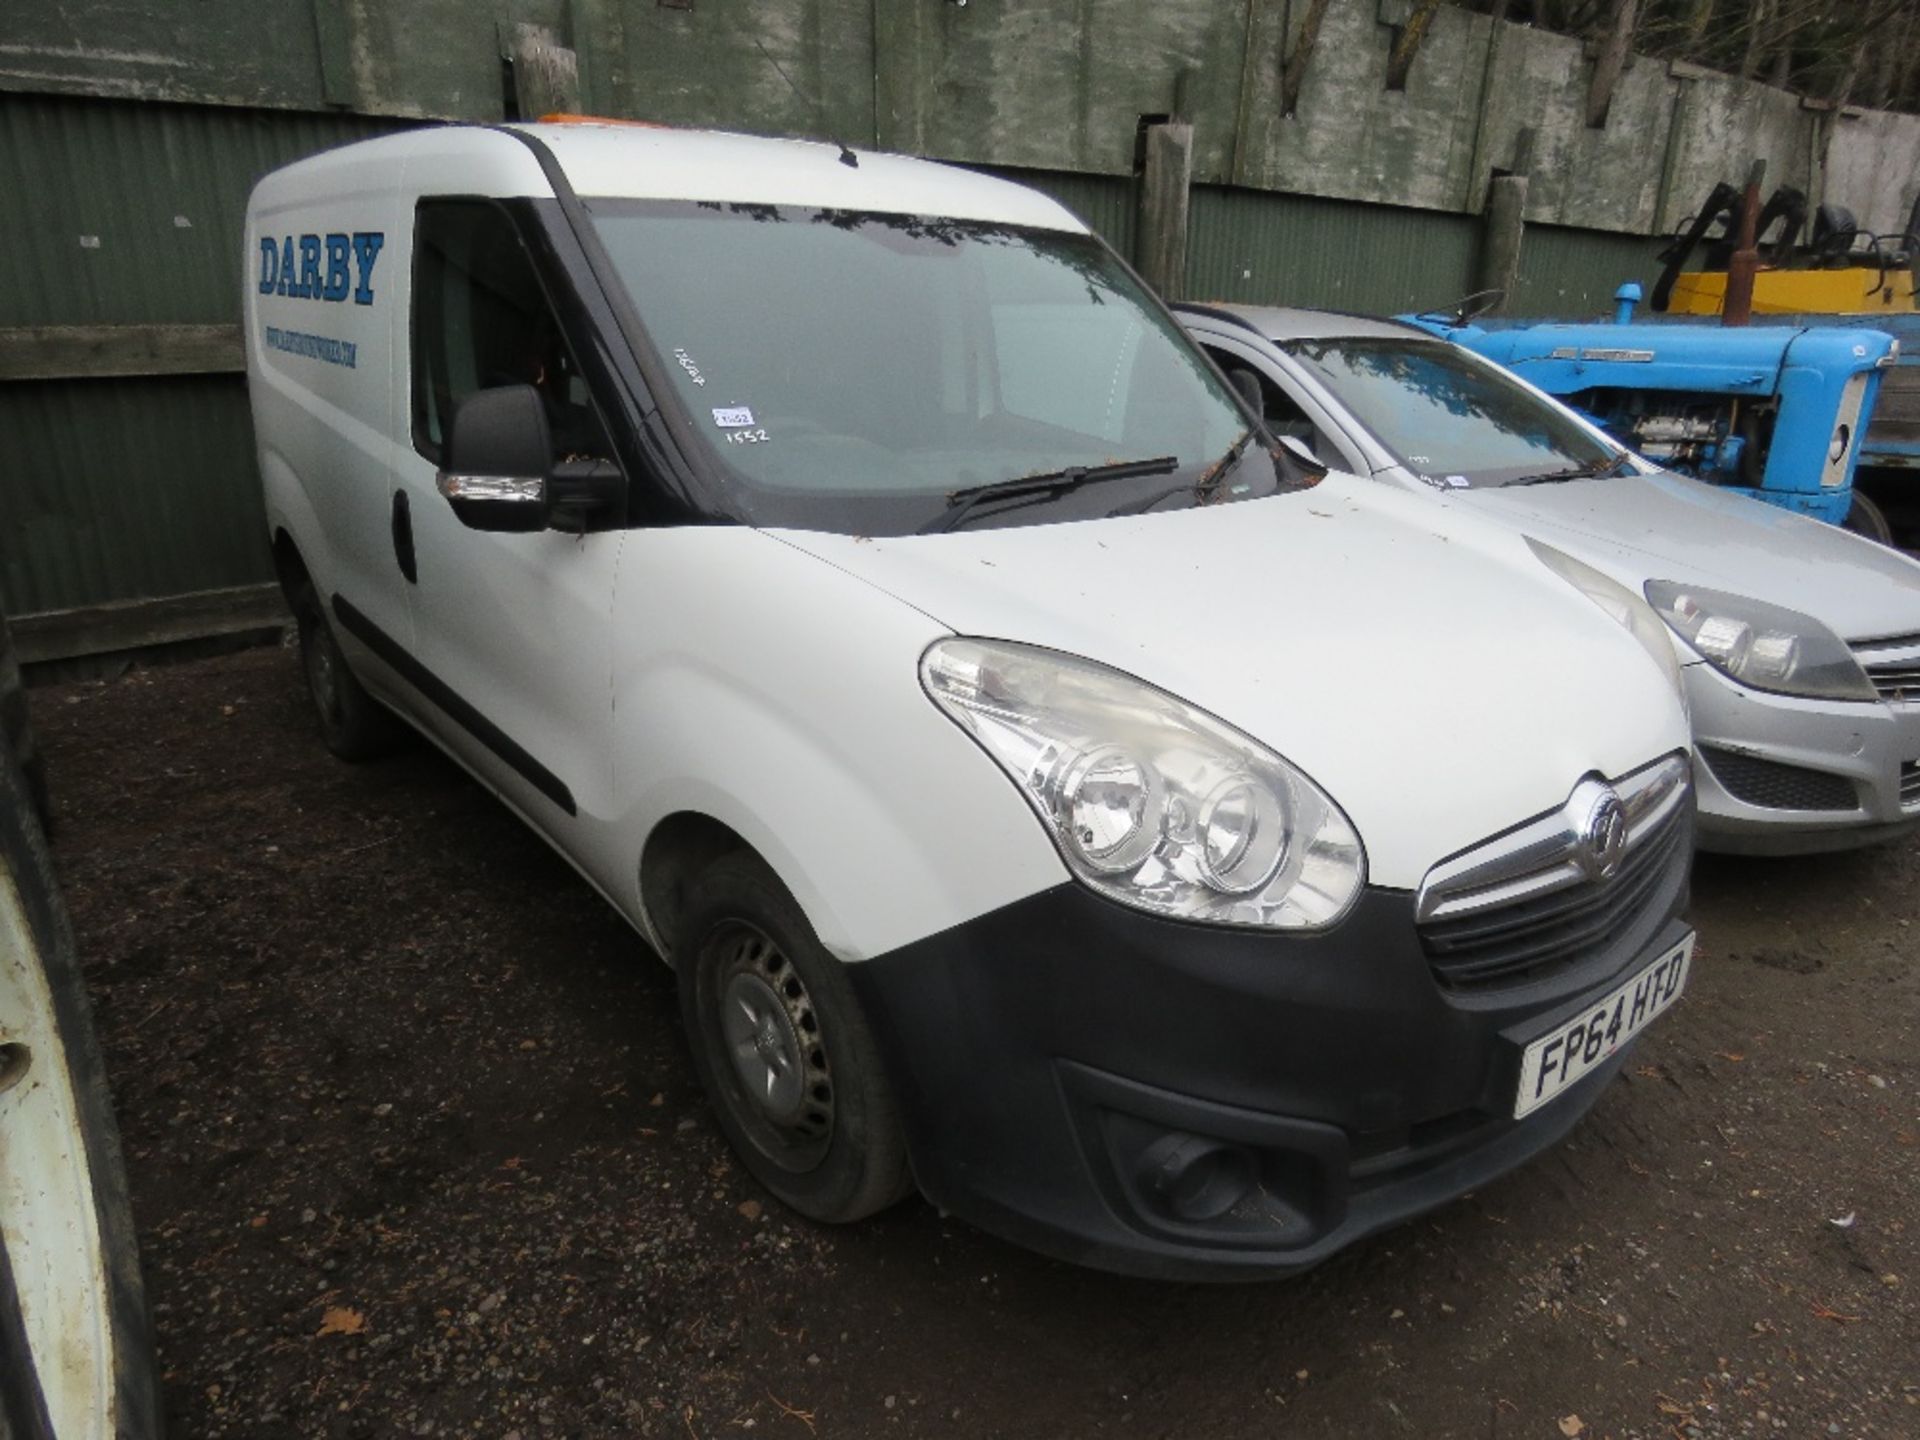 VAUXHALL COMBI PANEL VAN REG: FP64 HTD WITH V5, TESTED UNTIL 30TH OCTOBER 2022. ONE OWNER, OWNED FRO